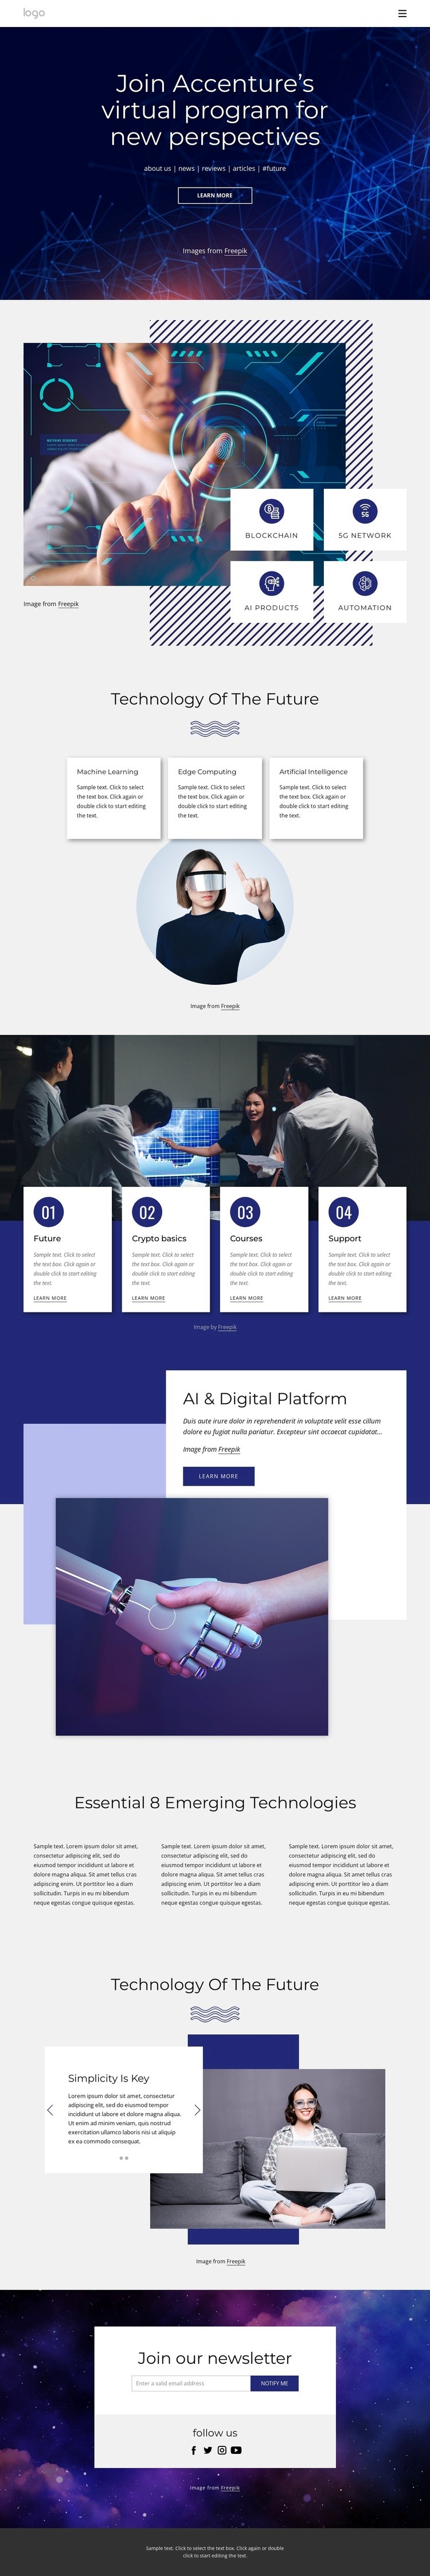 New technology perspectives Squarespace Template Alternative